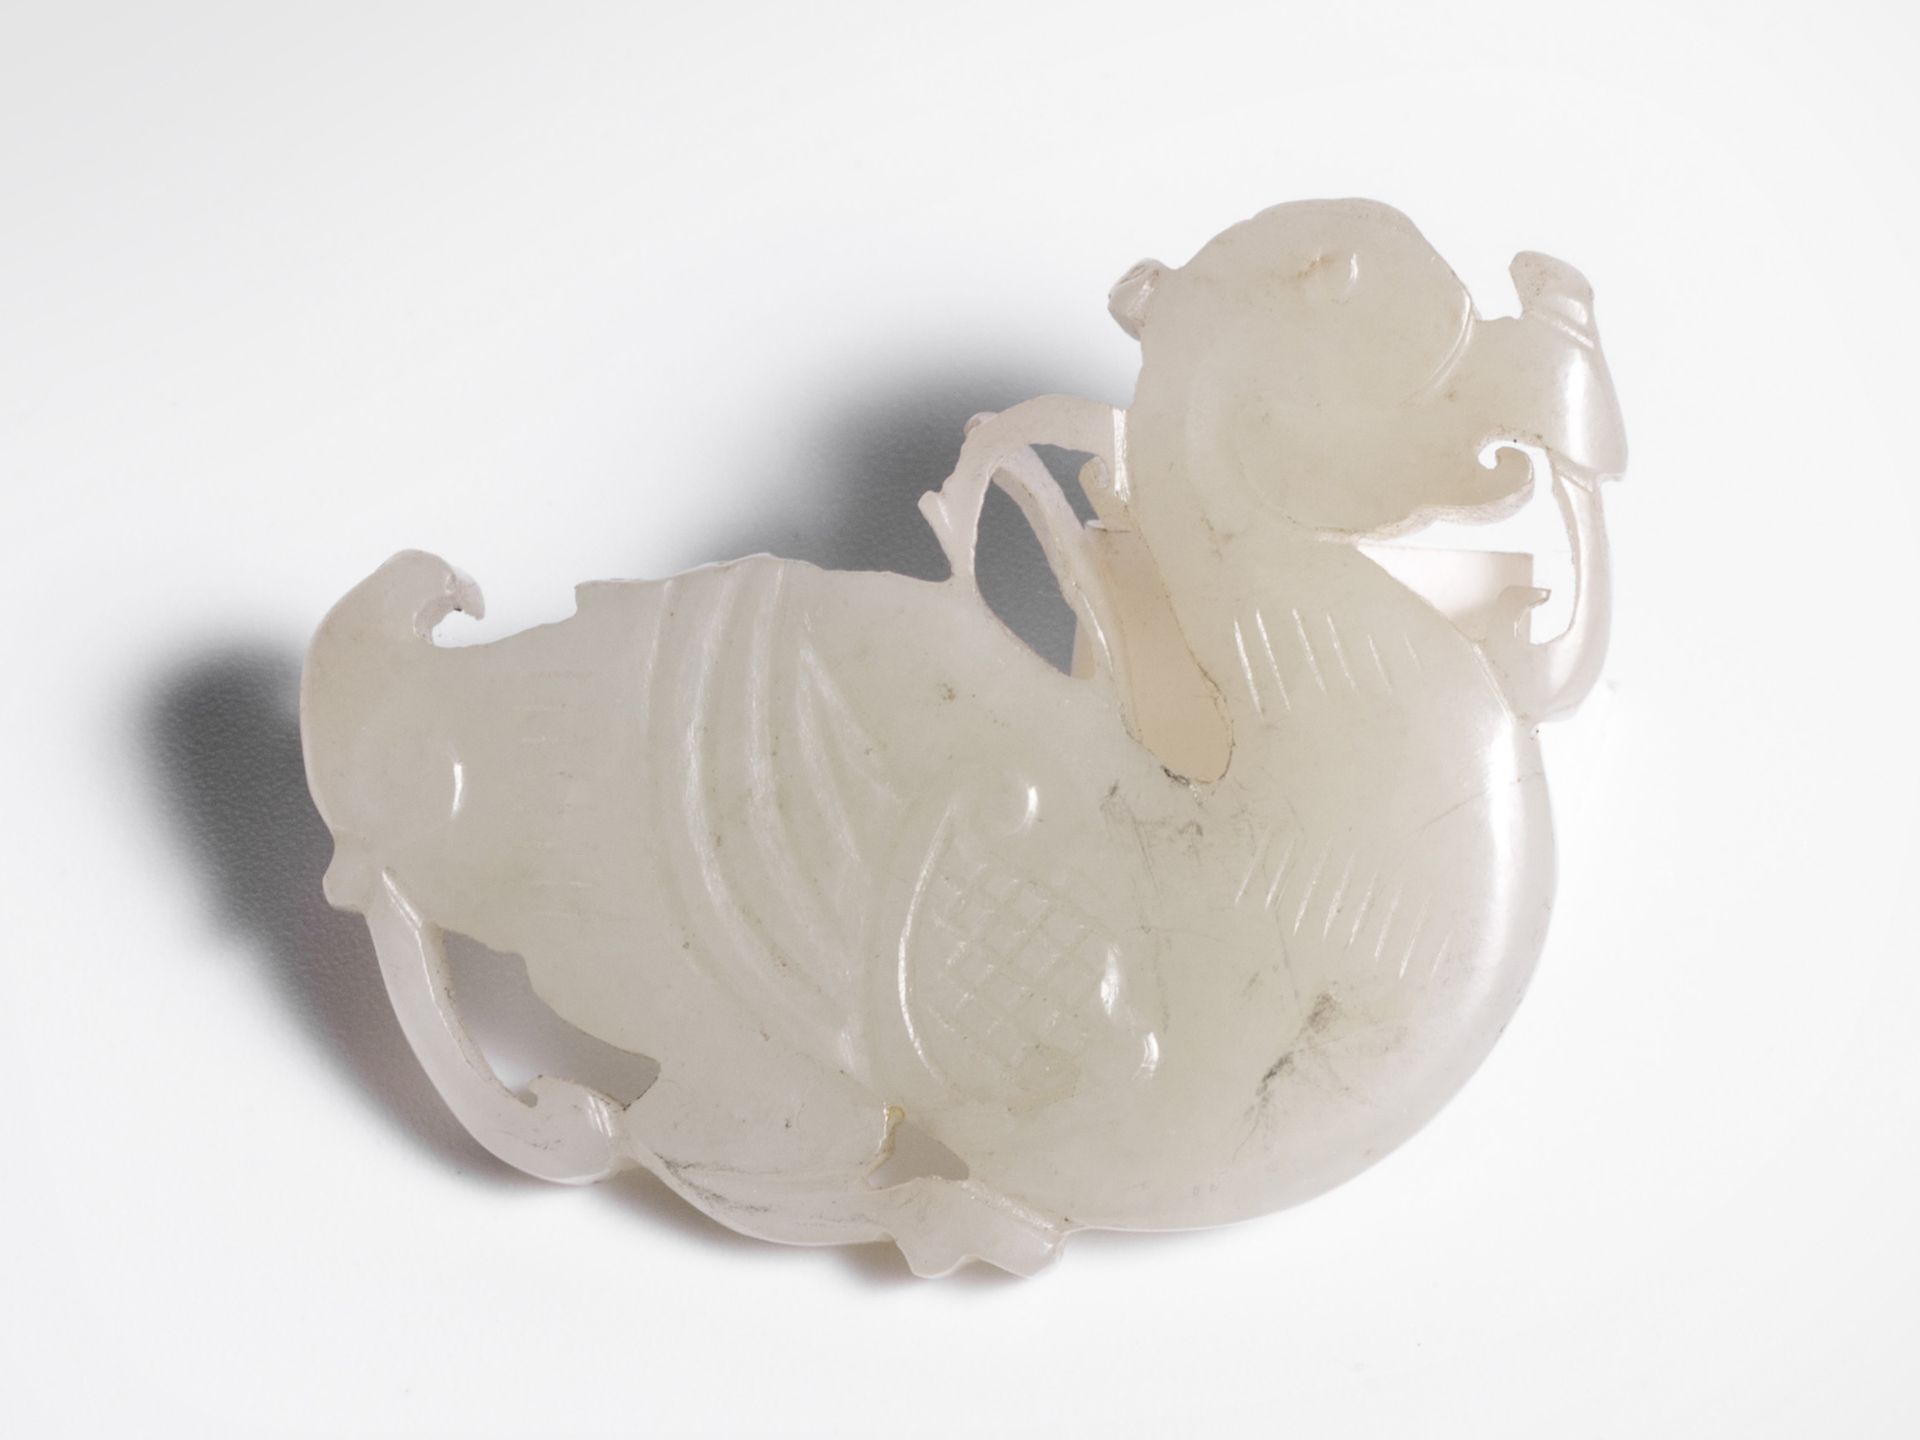 Jade duck, China, Yuan dynasty or Early Ming dynasty - Image 2 of 2